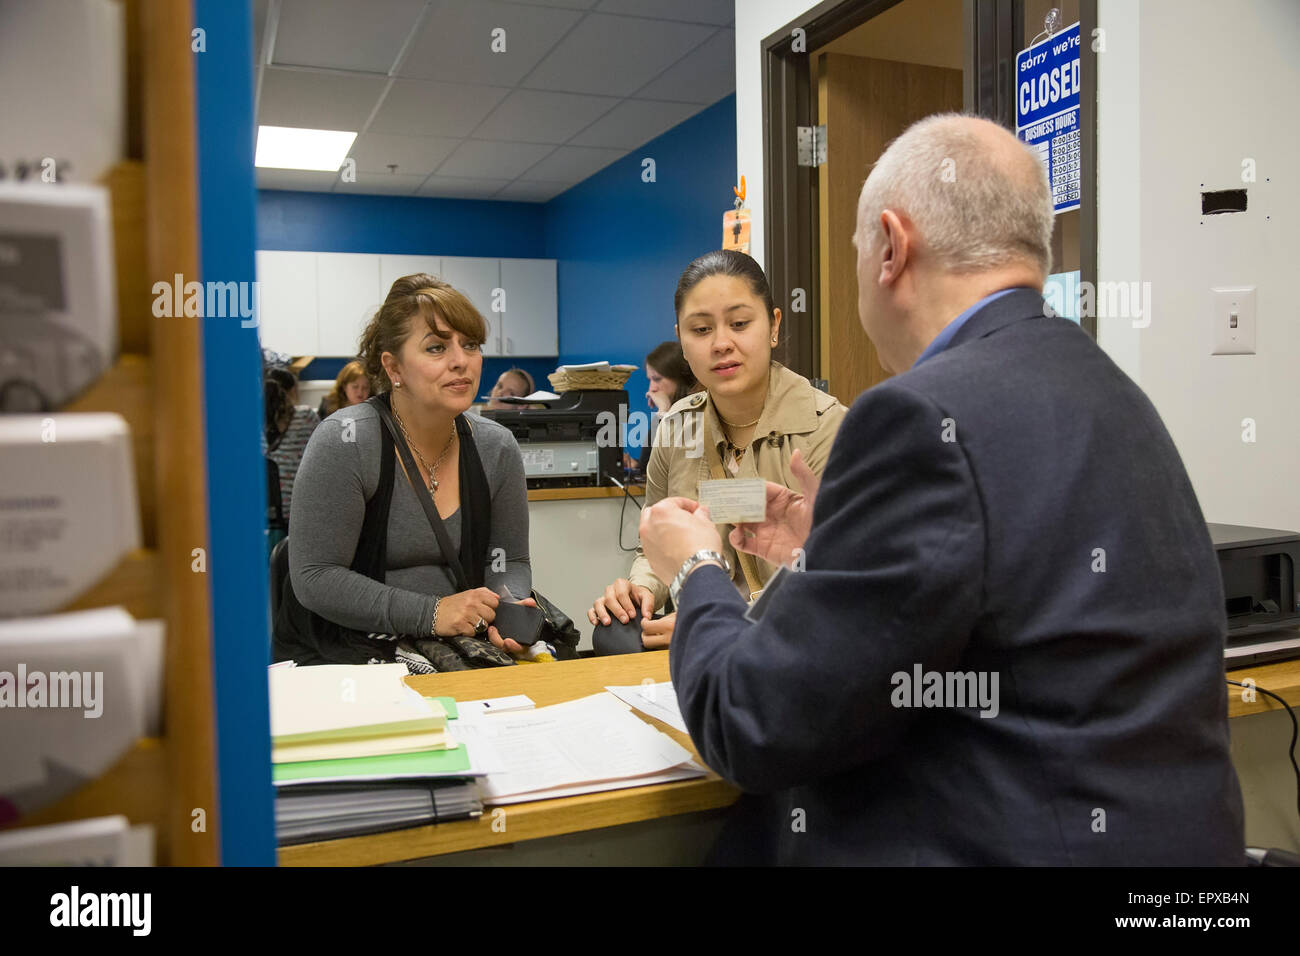 Detroit, Michigan - Counselors help immigrants with their applications for U.S. citizenship. Stock Photo